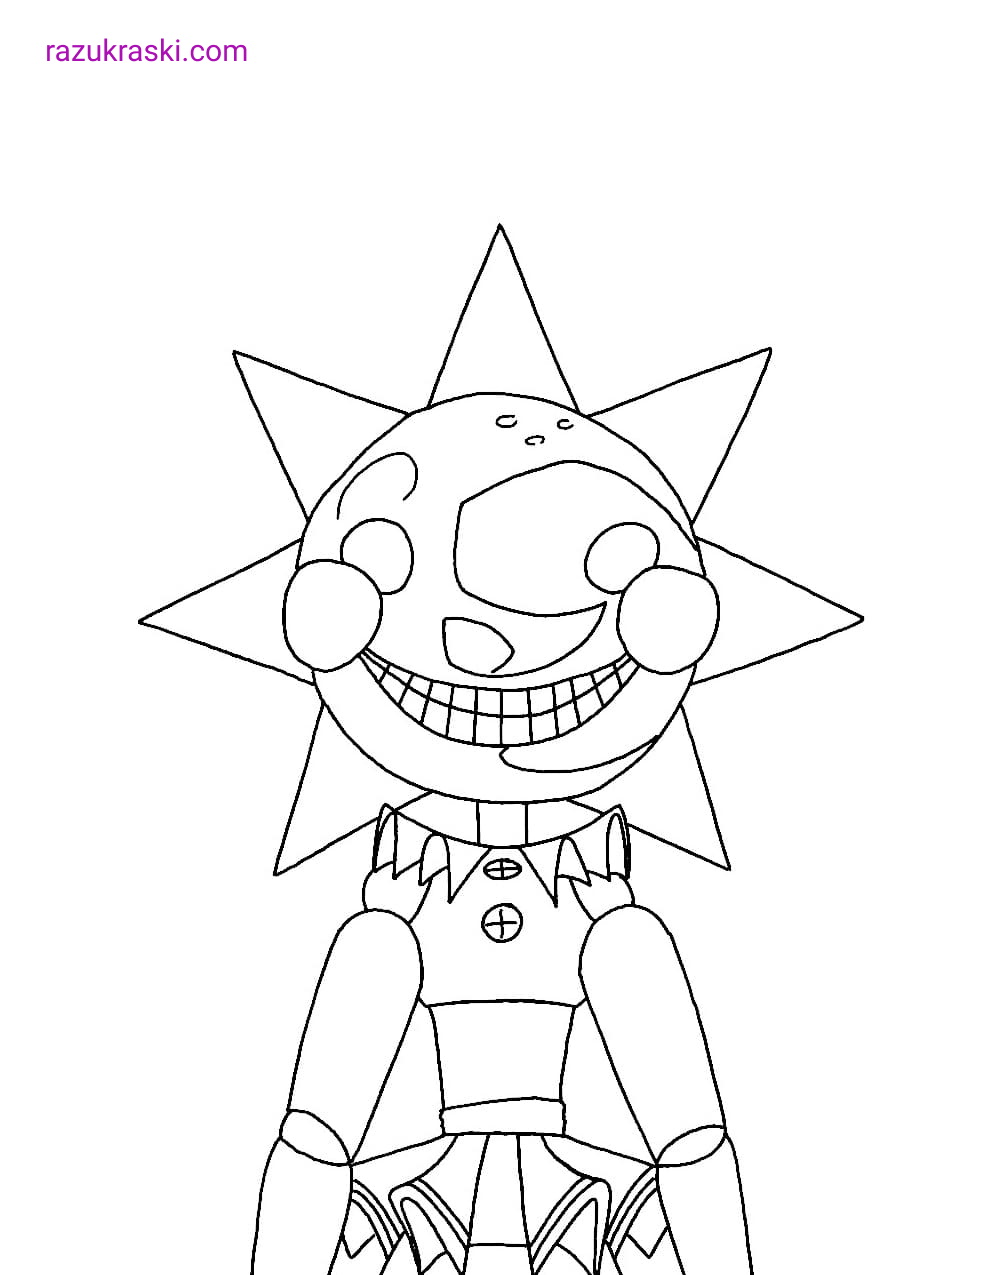 Coloring page FNAF 9 The sun from the game